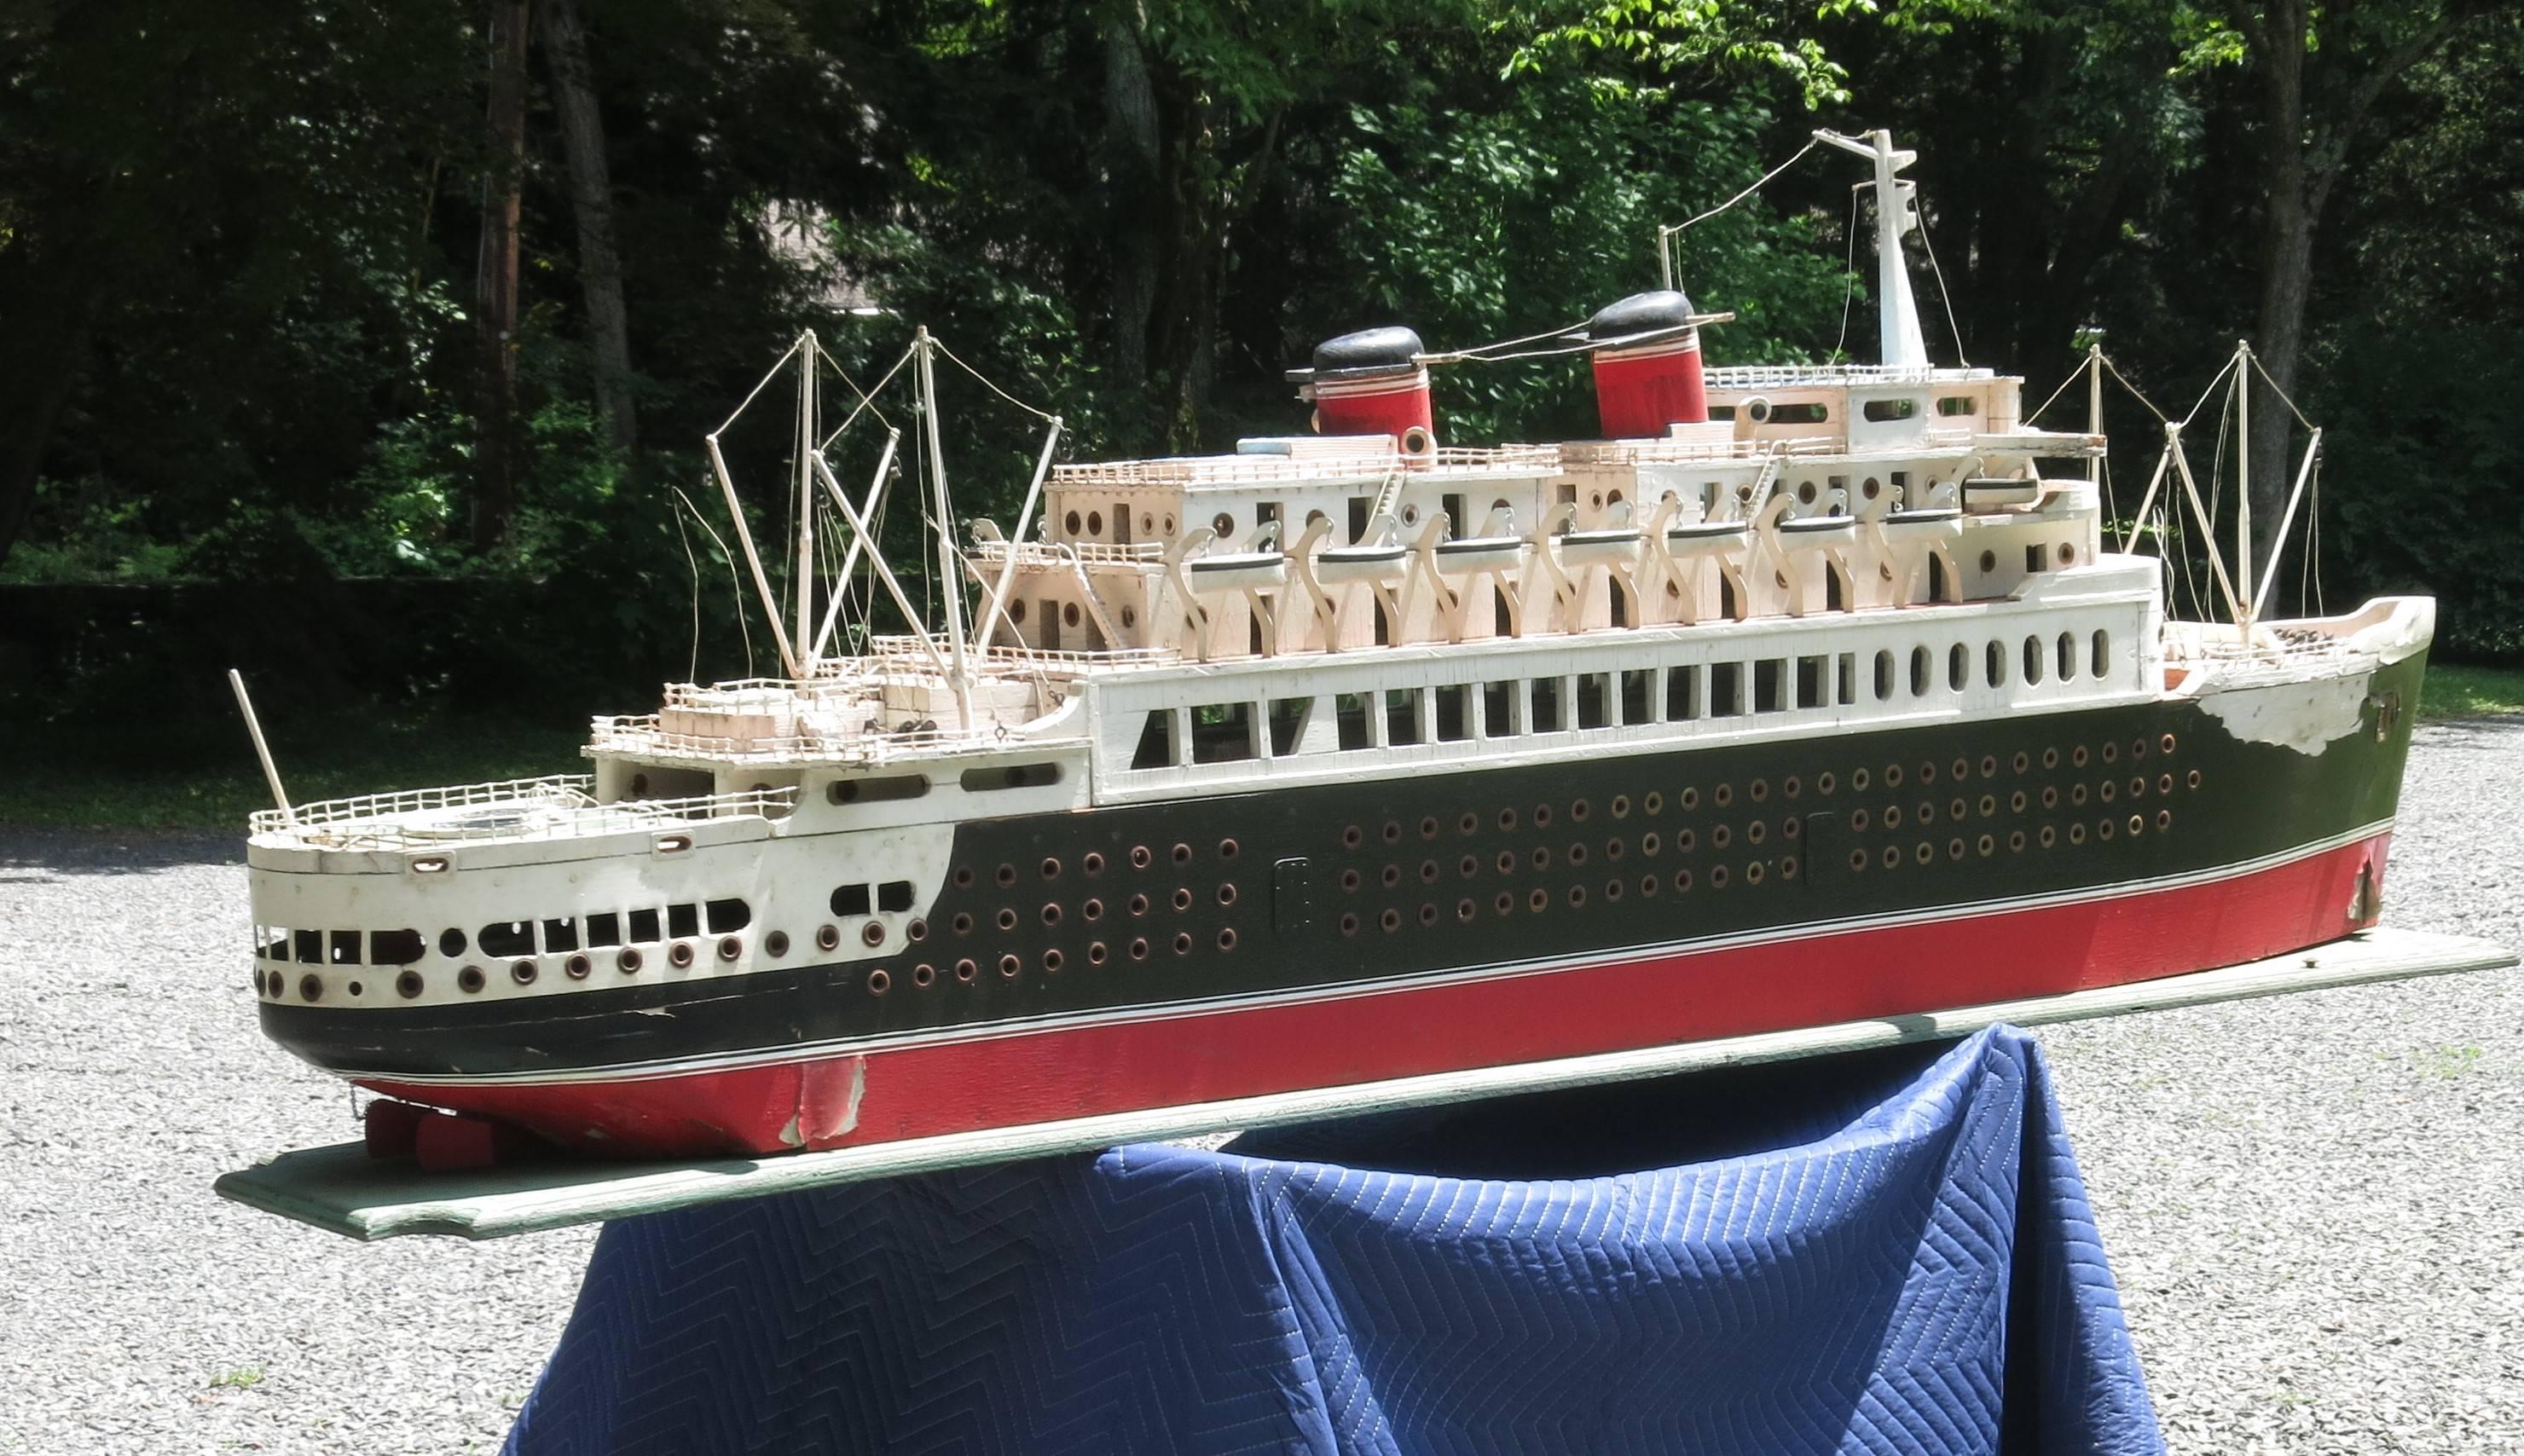 Monumental ocean liner,  ship model from the 1950s. A piece of handmade folk art made to depict  ships that crossed the Atlantic. It is 8 feet long x 33 